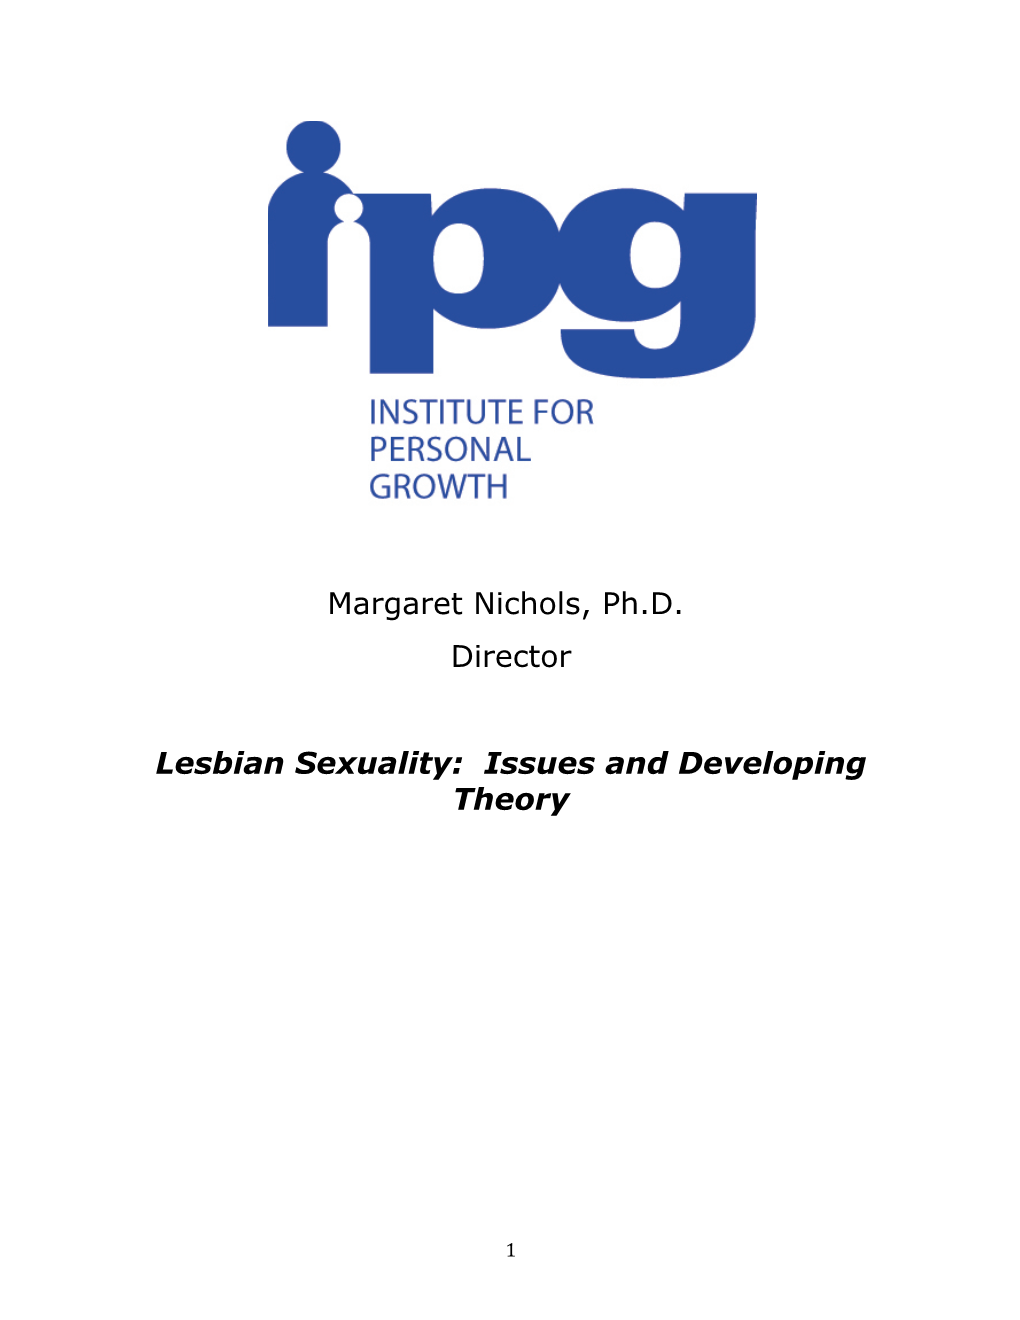 Margaret Nichols, Ph.D. Director Lesbian Sexuality: Issues and Developing Theory